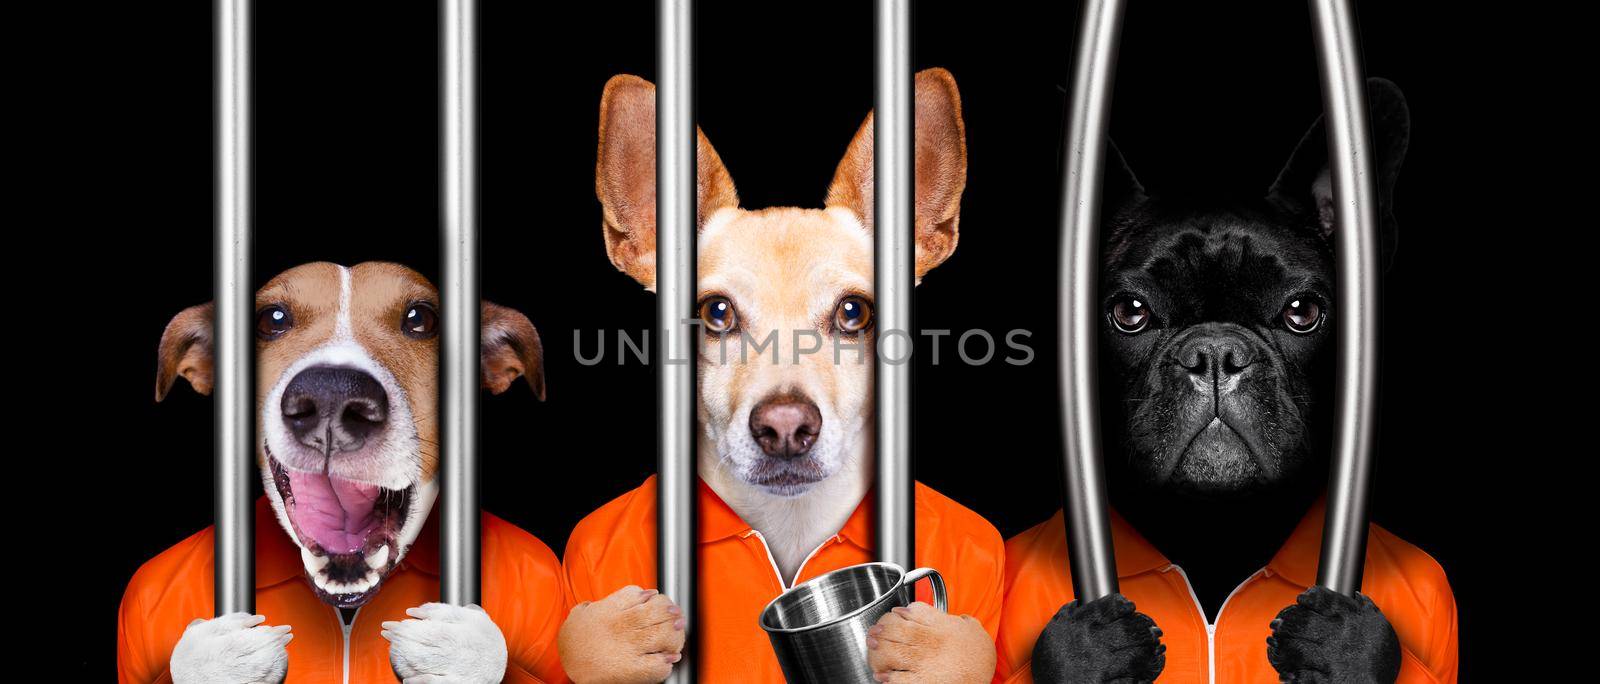 dogs behind bars in jail prison by Brosch